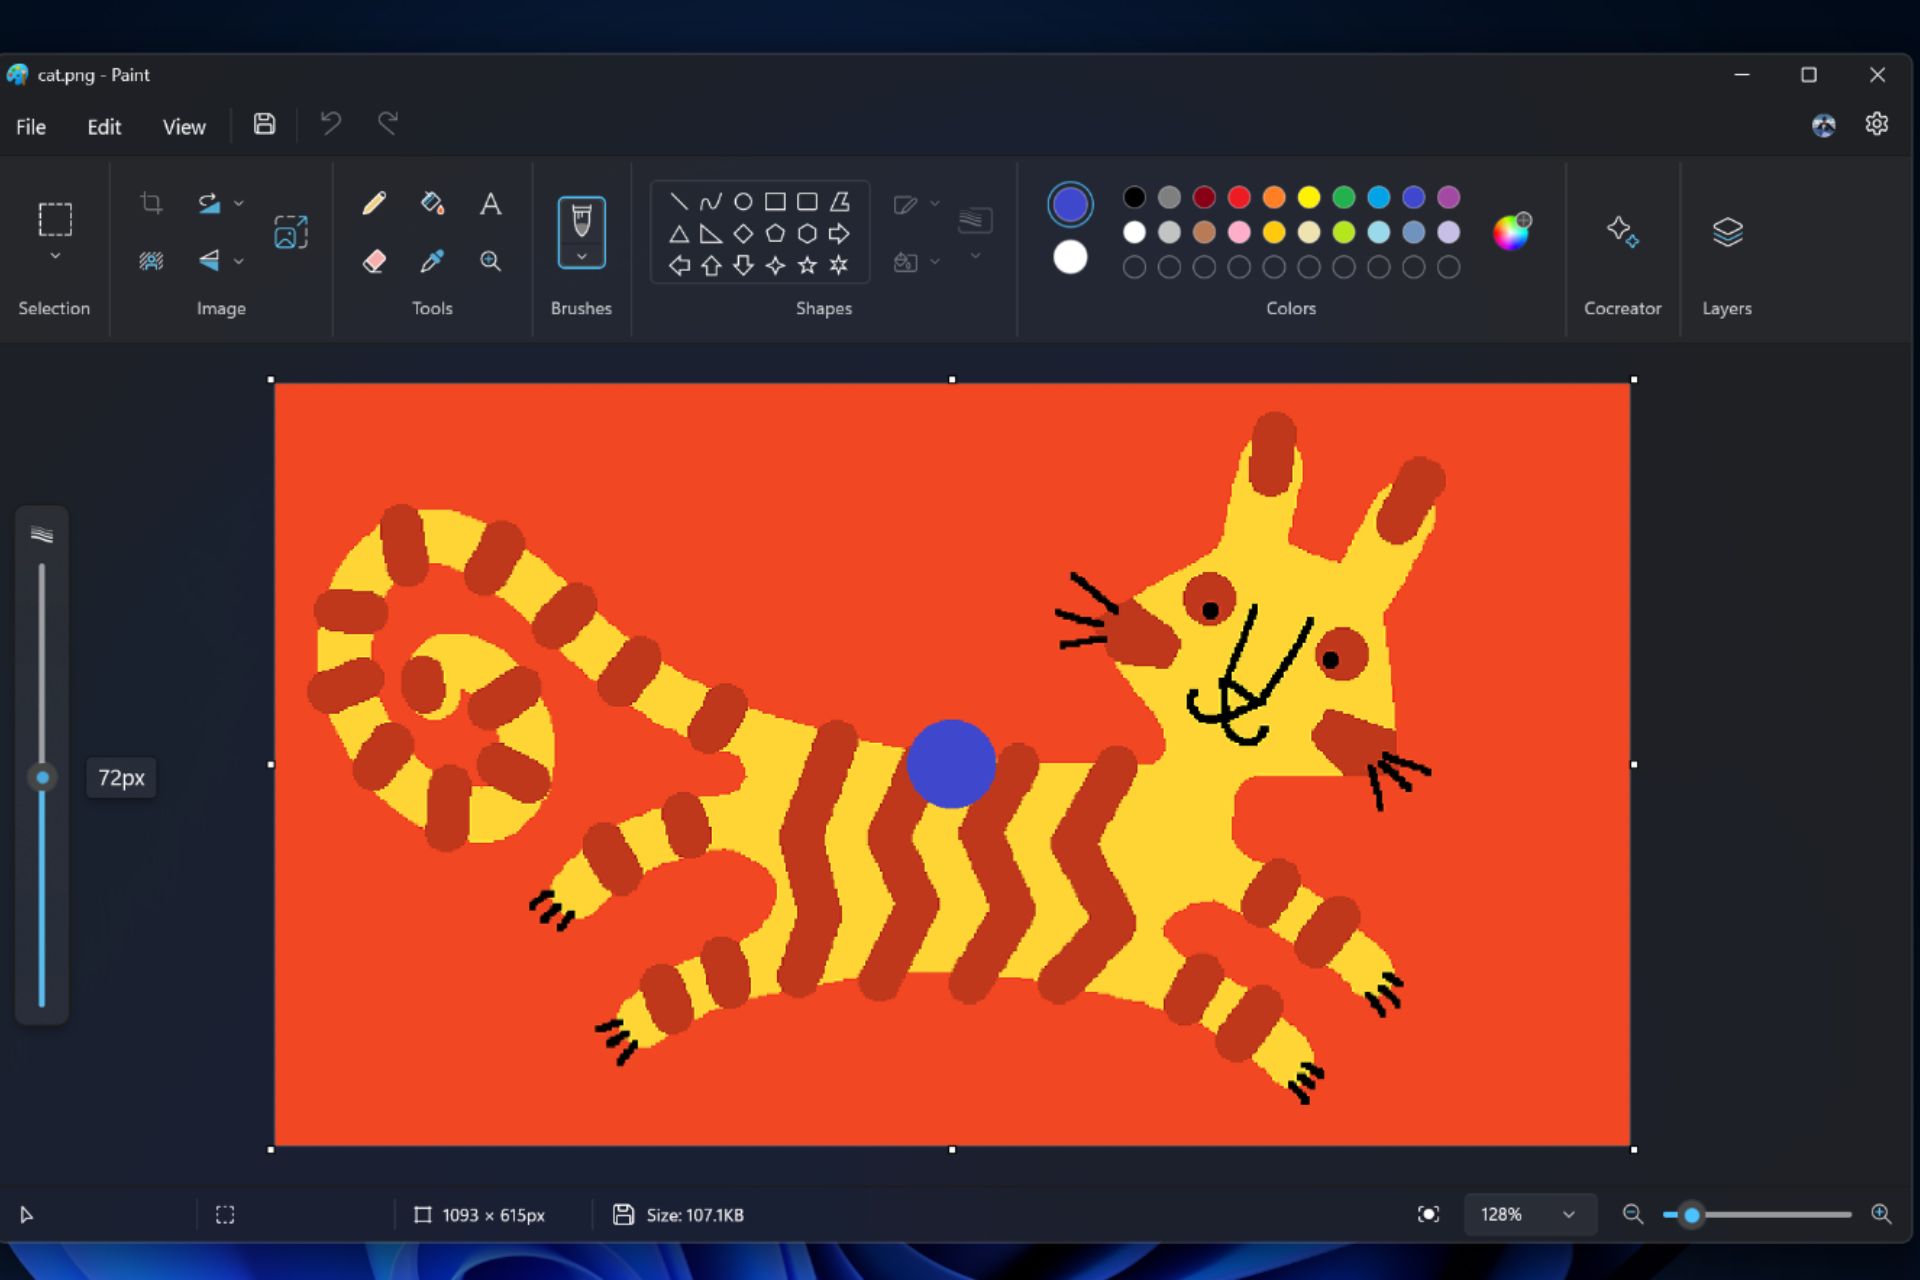 Microsoft Paint’s new slider allows users to customize canvas sizes precisely